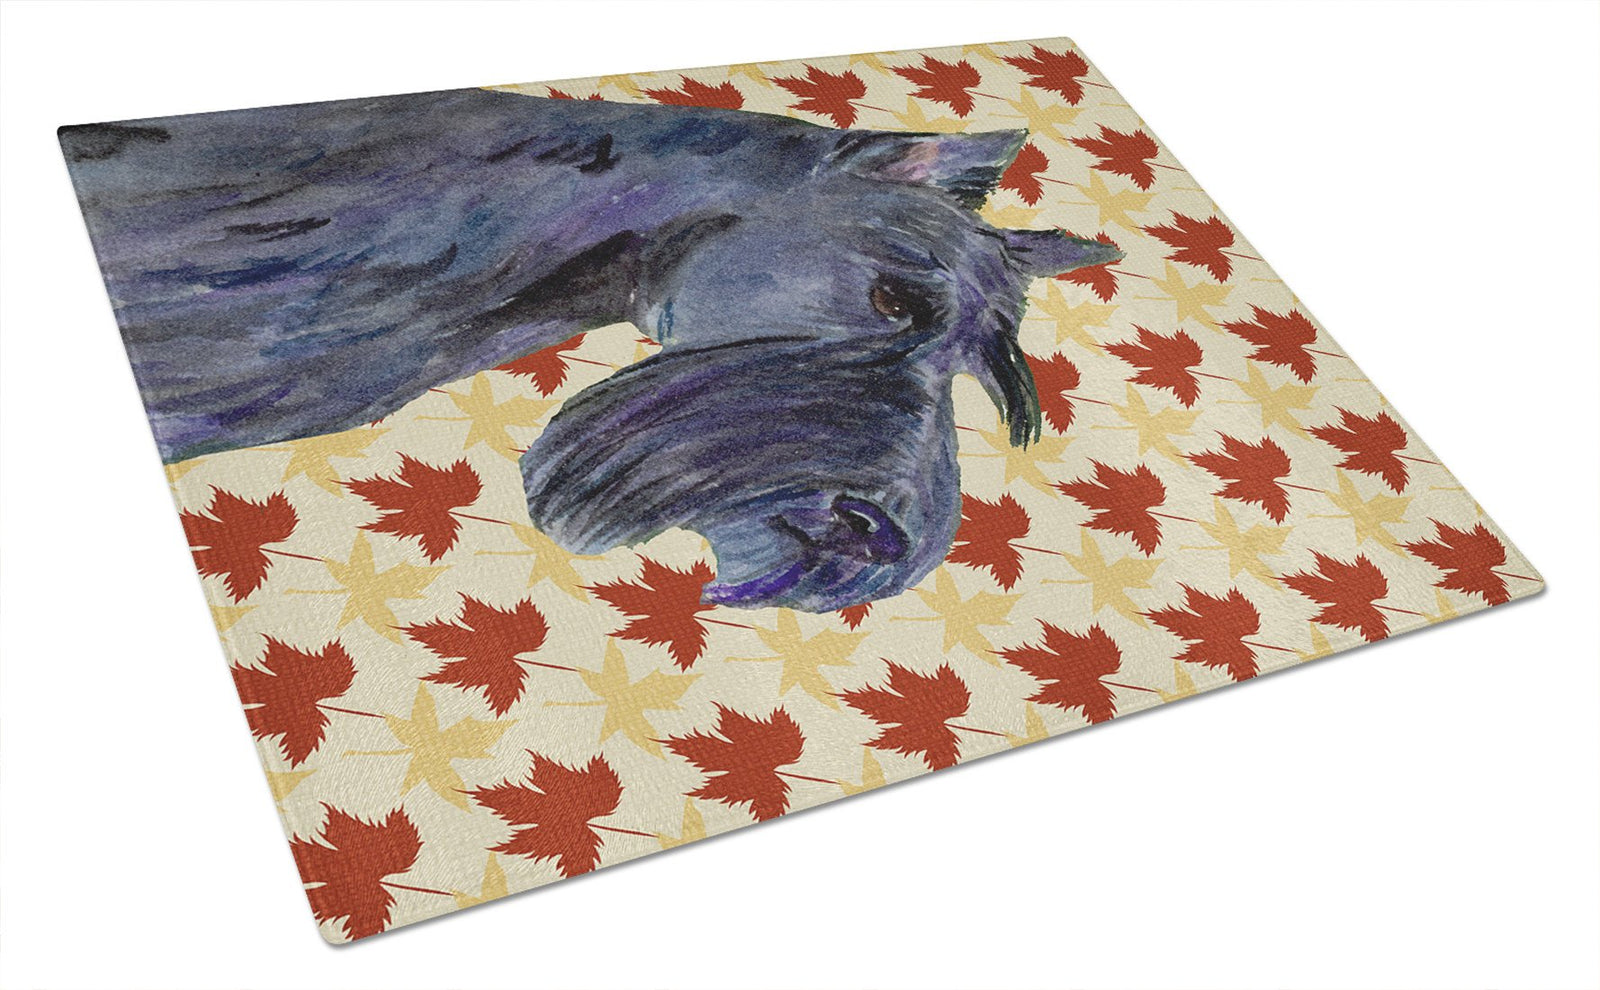 Scottish Terrier Fall Leaves Portrait Glass Cutting Board Large by Caroline's Treasures